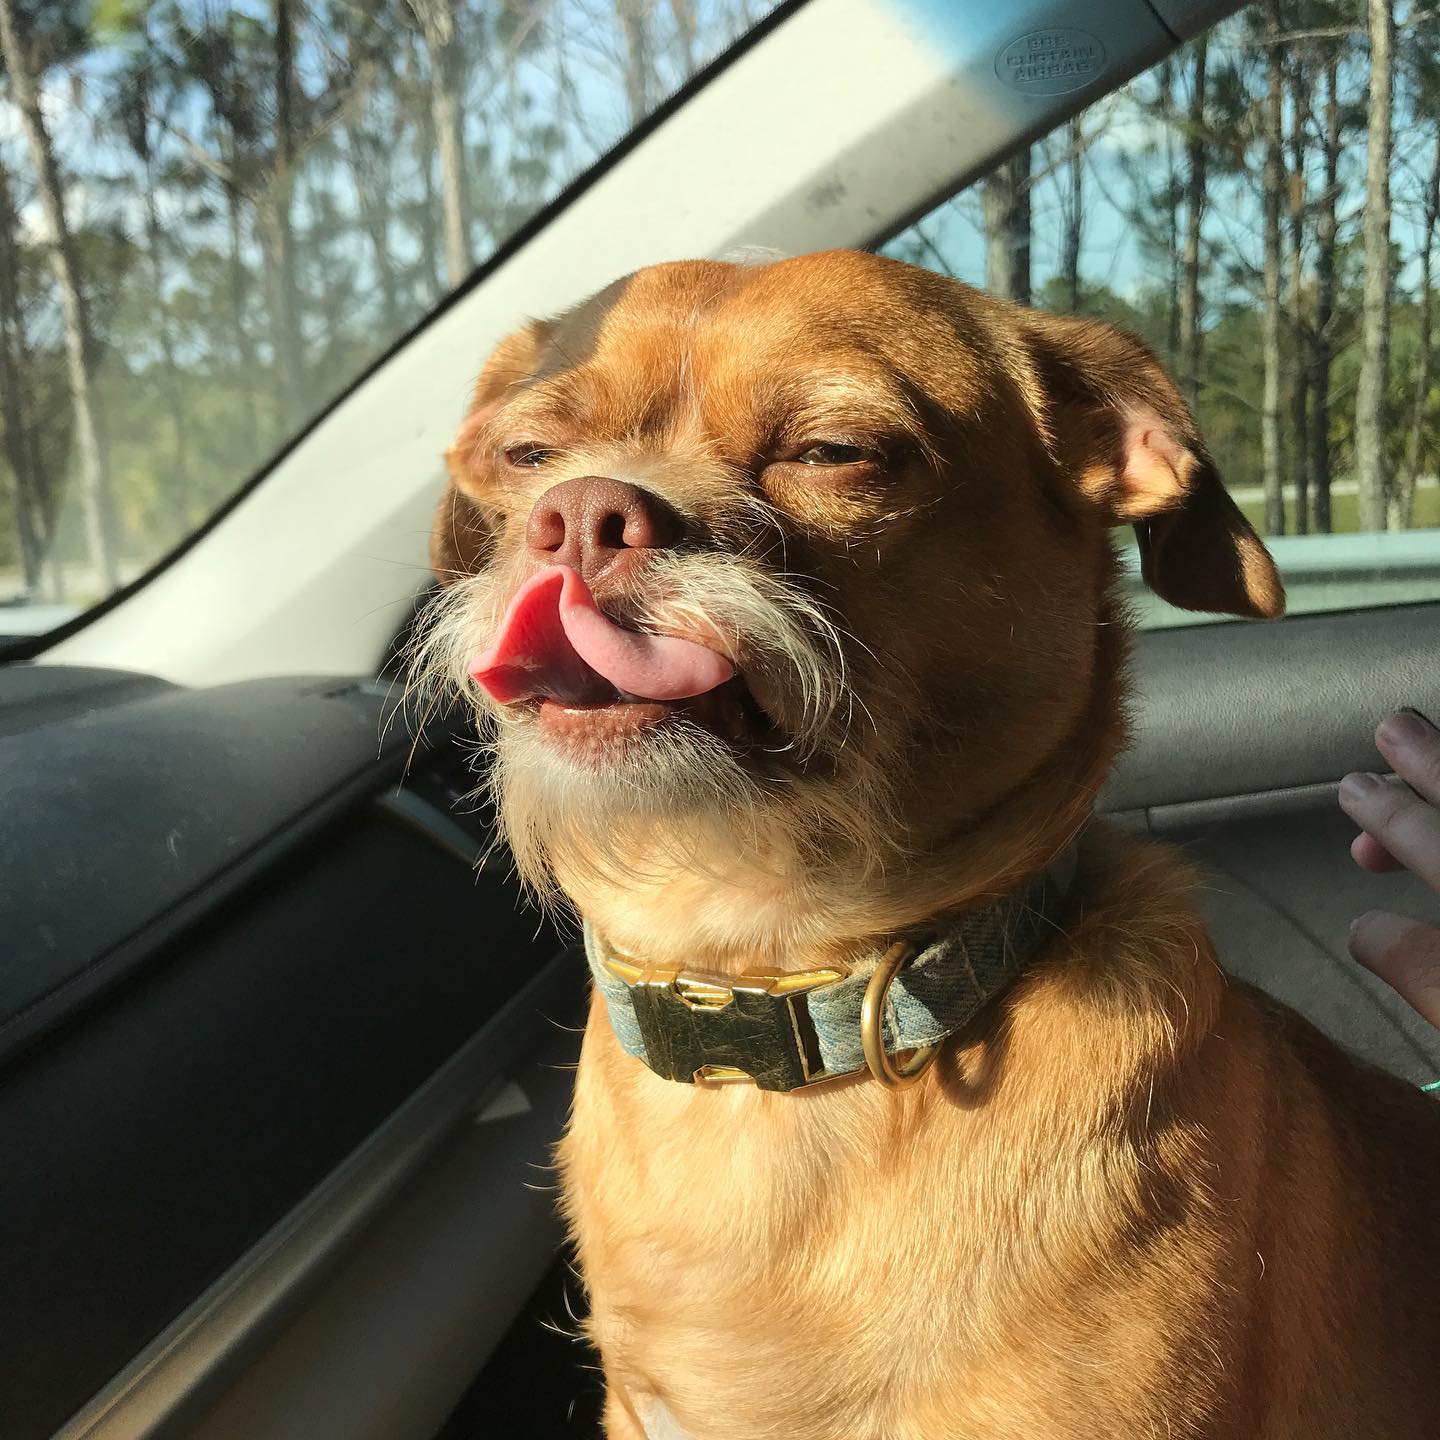 Bacon the dog riding in the car with his tongue curled outside his mouth